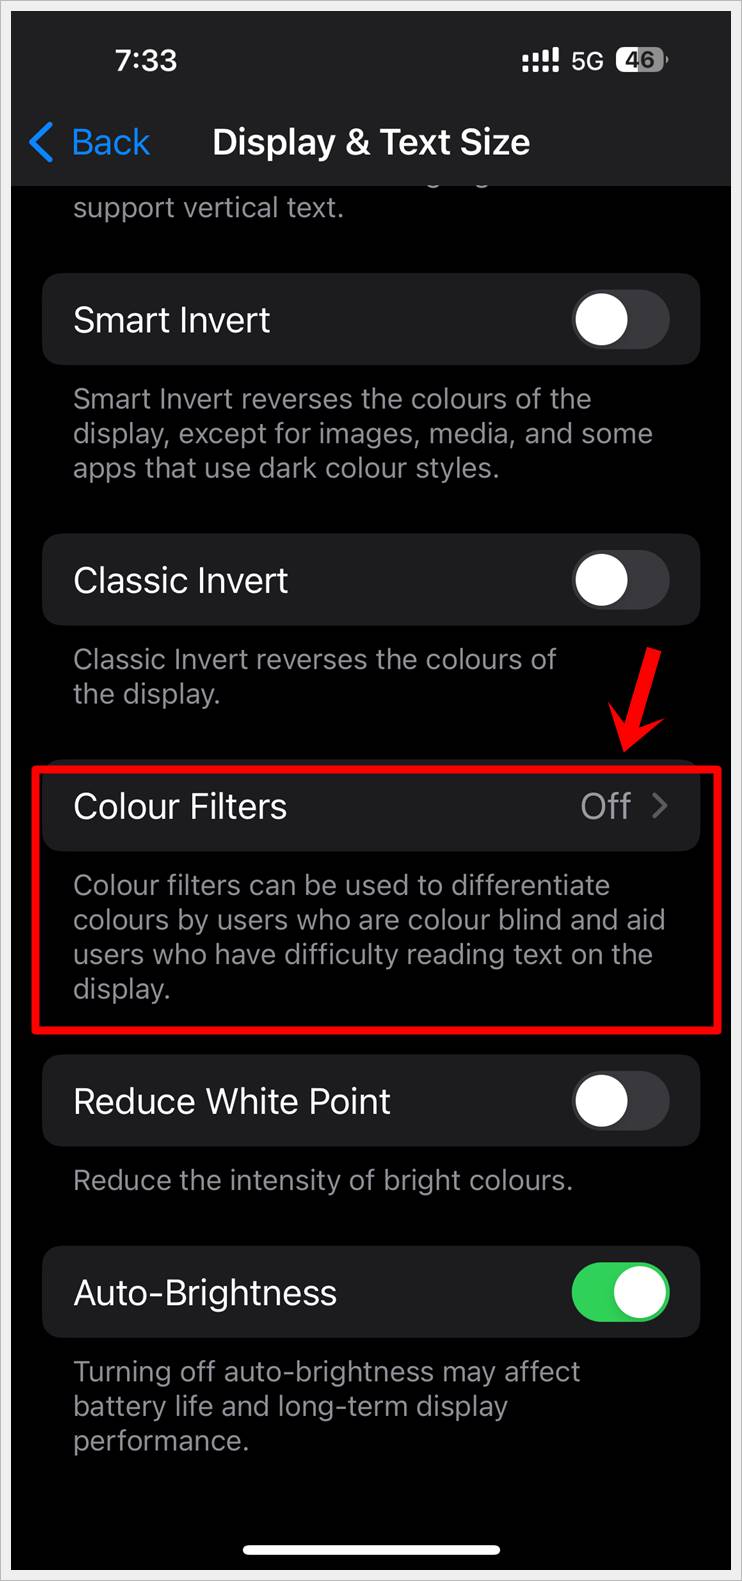 How to Make Your Phone Screen Display in Black and White: This image shows a screenshot of the 'Display & Text Size' page of an iPhone with the 'Color Filters' option highlighted.